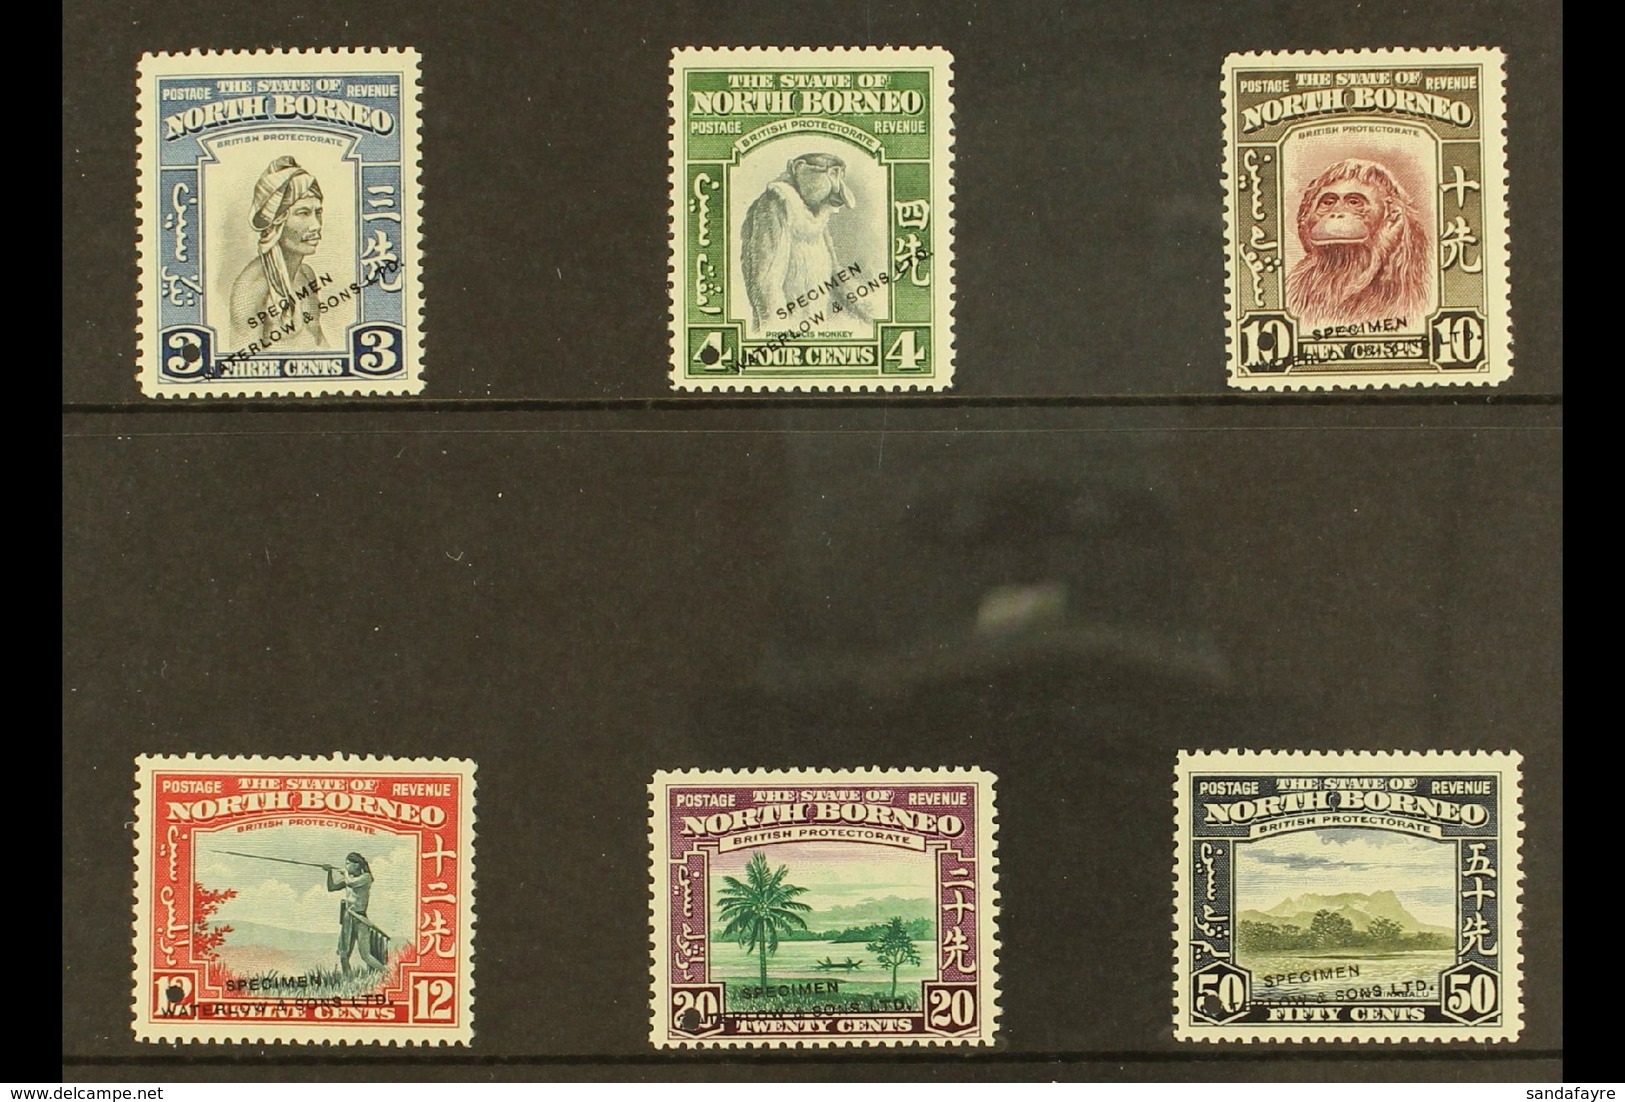 1939 PICTORIALS - COLOUR TRIALS Includes 6 Values To 50c Each With Small Punch Hole And Overprinted Waterlow & Sons Ltd  - Bornéo Du Nord (...-1963)